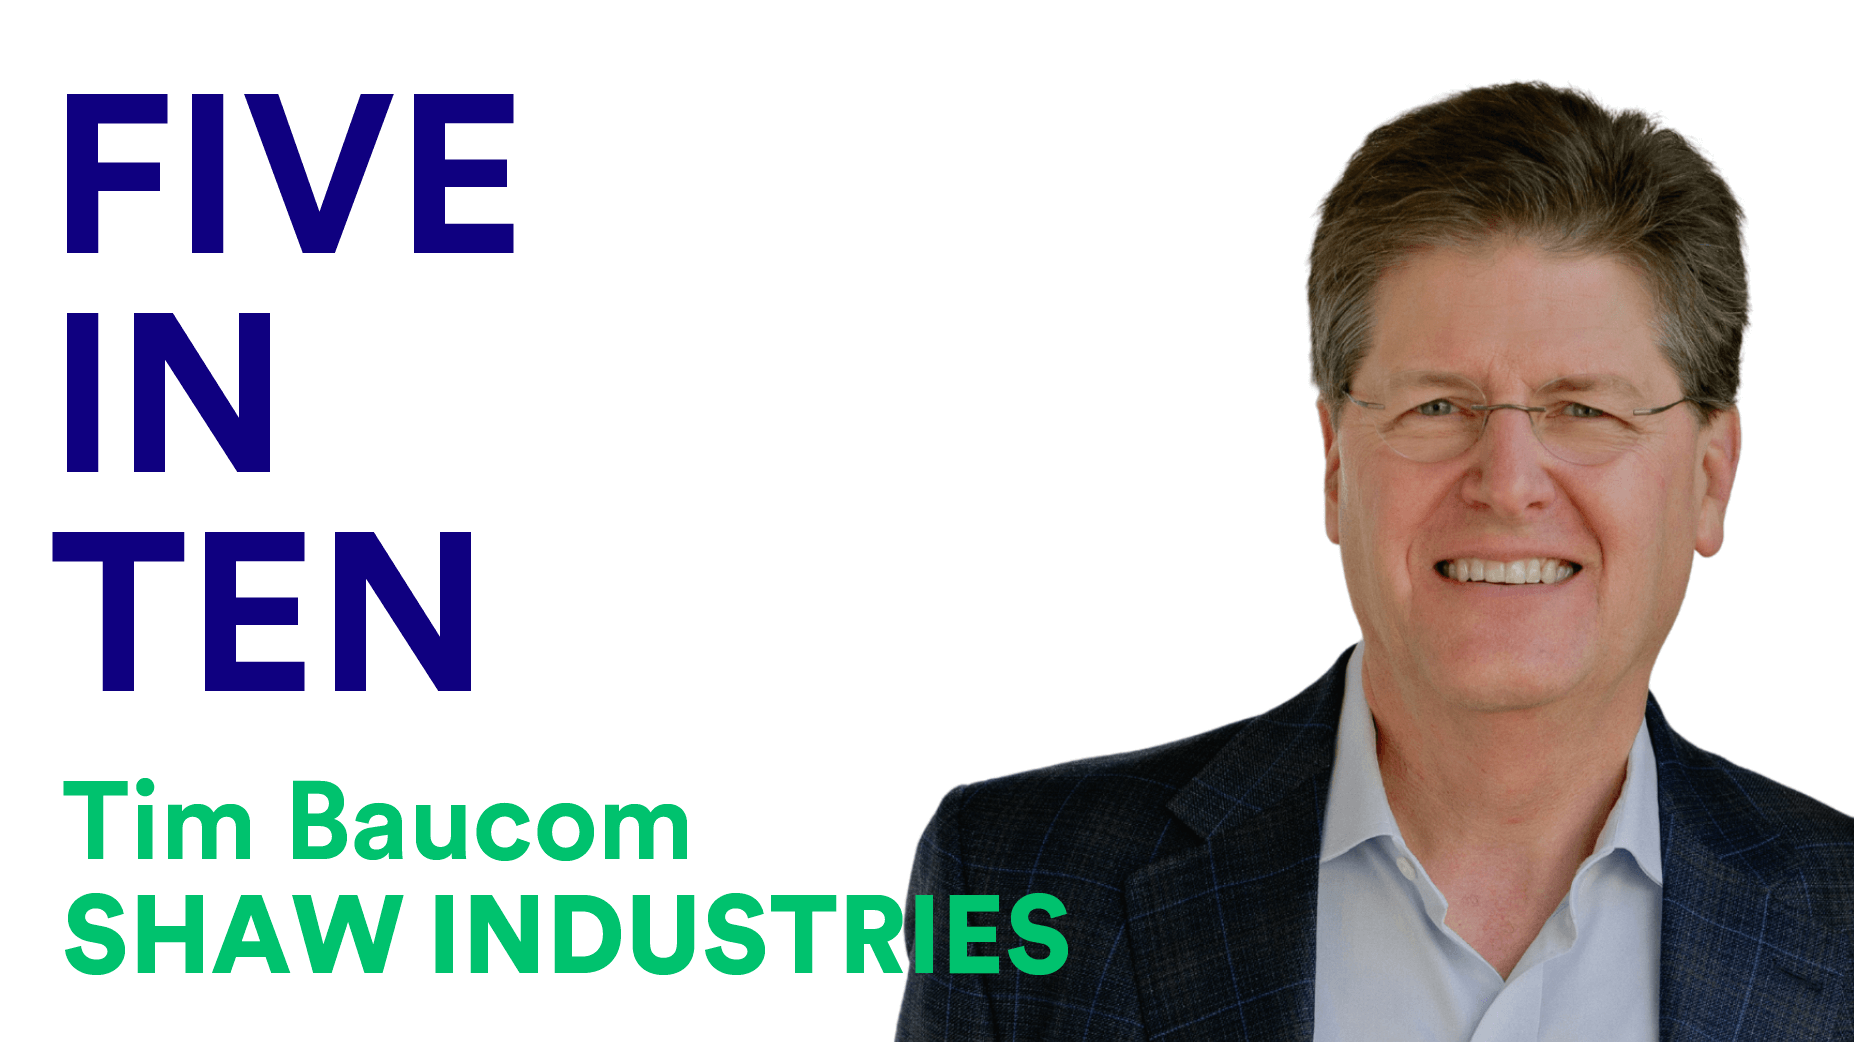 Tim Baucom on the power of product innovation